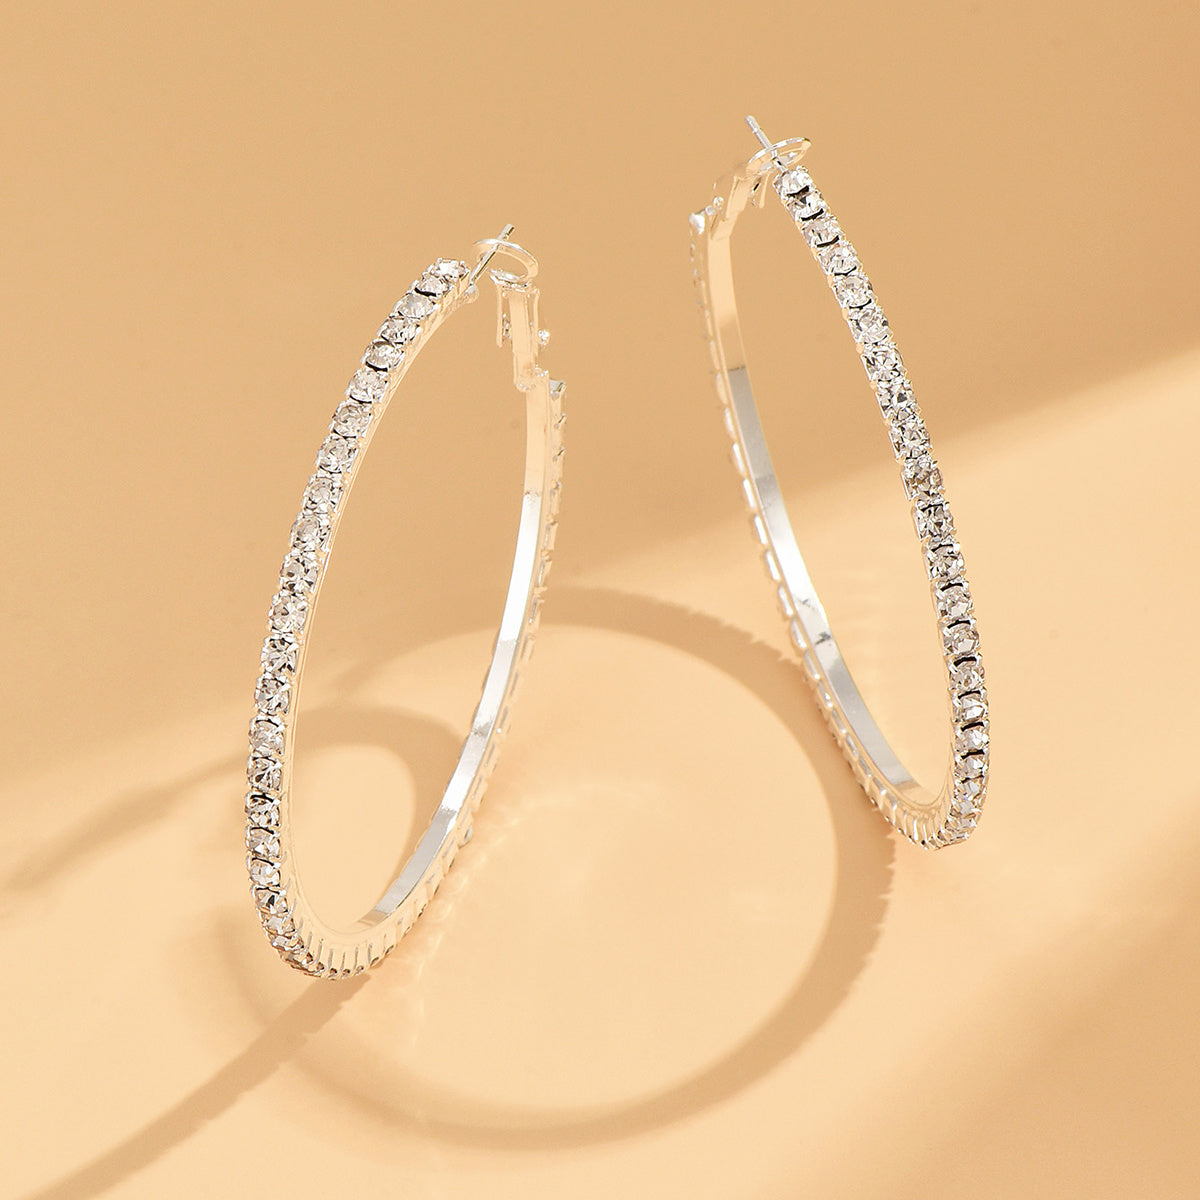 Elegant Round Rhinestone Hoop Earrings for Women and Girls - Perfect for Weddings and Special Occasions